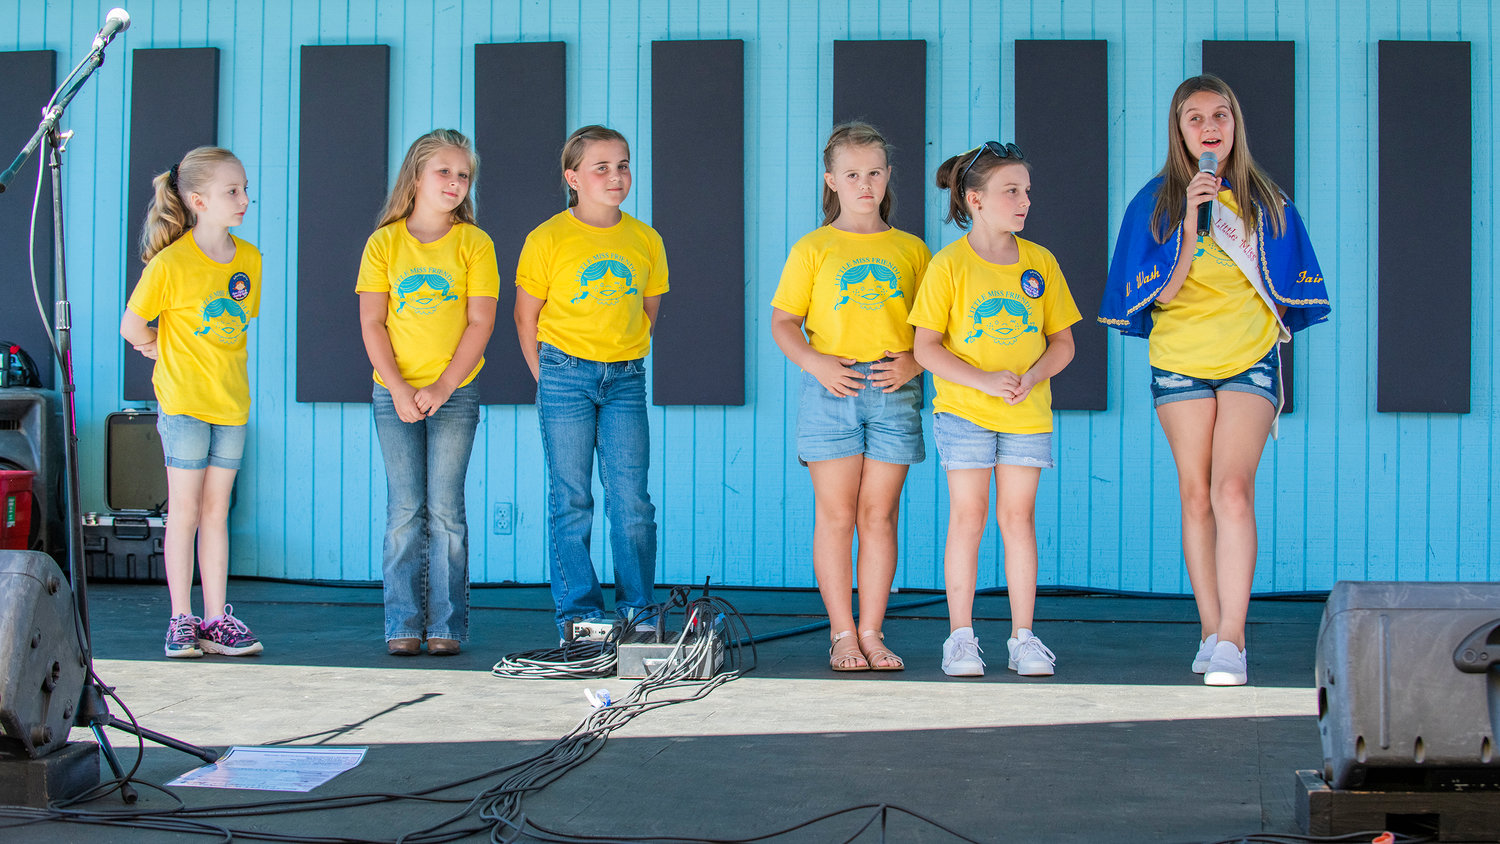 Little Miss Friendly MaKayla Maynard introduces candidates vying for the spot and title as the living logo for the Southwest Washington Fairgrounds in Centralia on Tuesday.